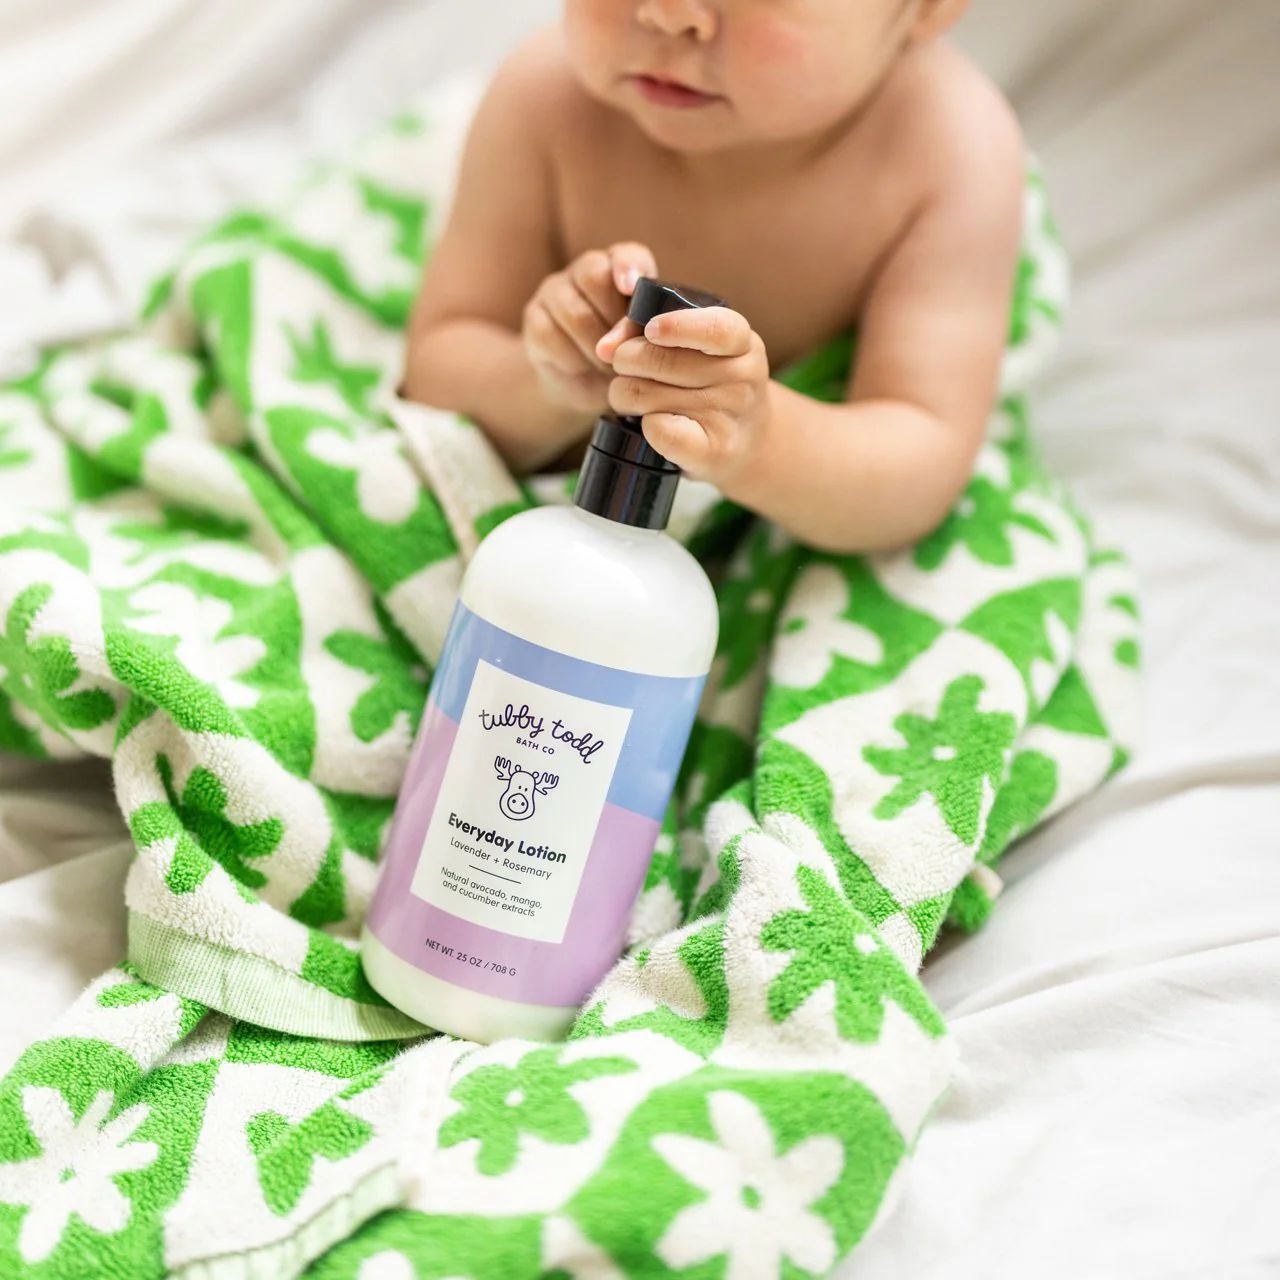 Gentle body care basics for the whole family. | Tubby Todd Bath Co